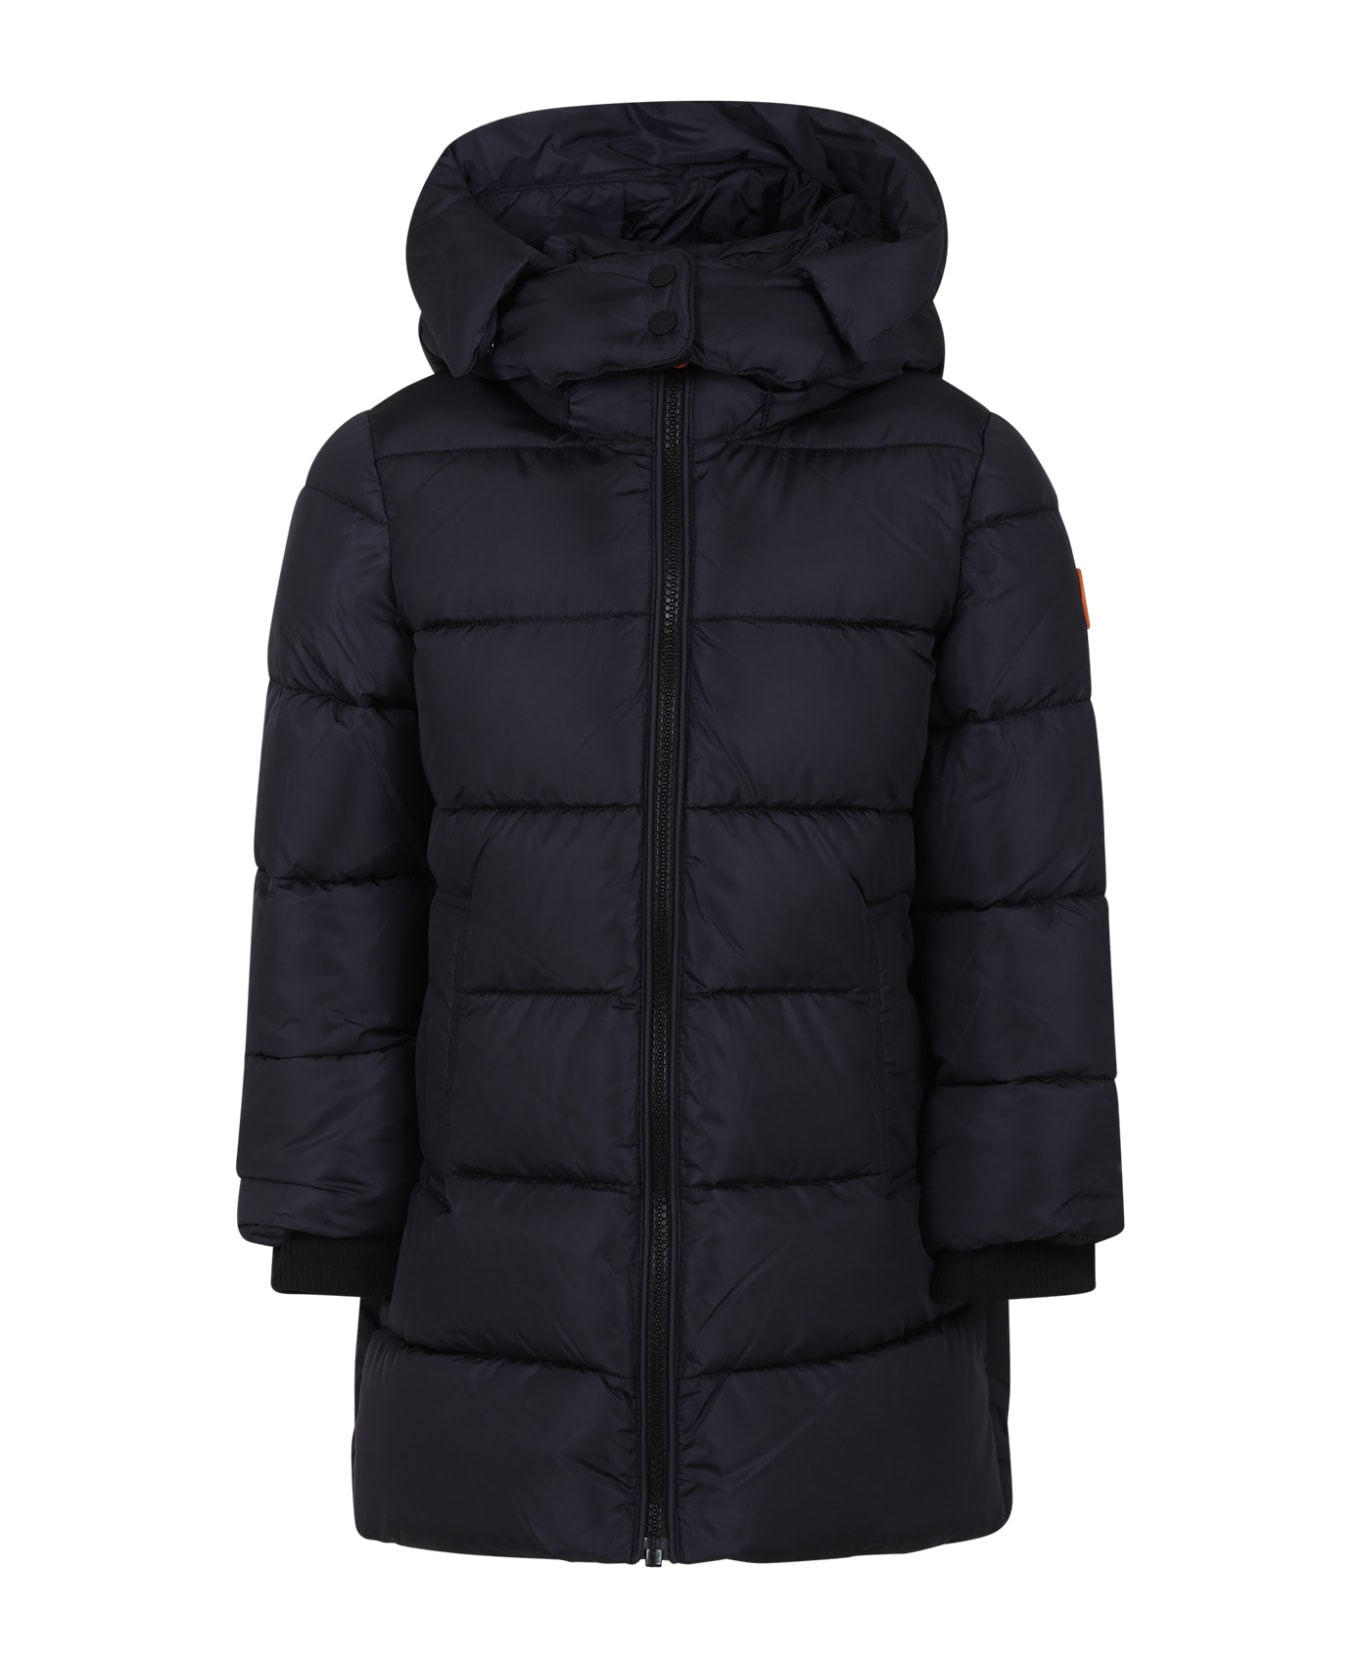 Save the Duck Black Down Jacket For Girl With Logo - Black